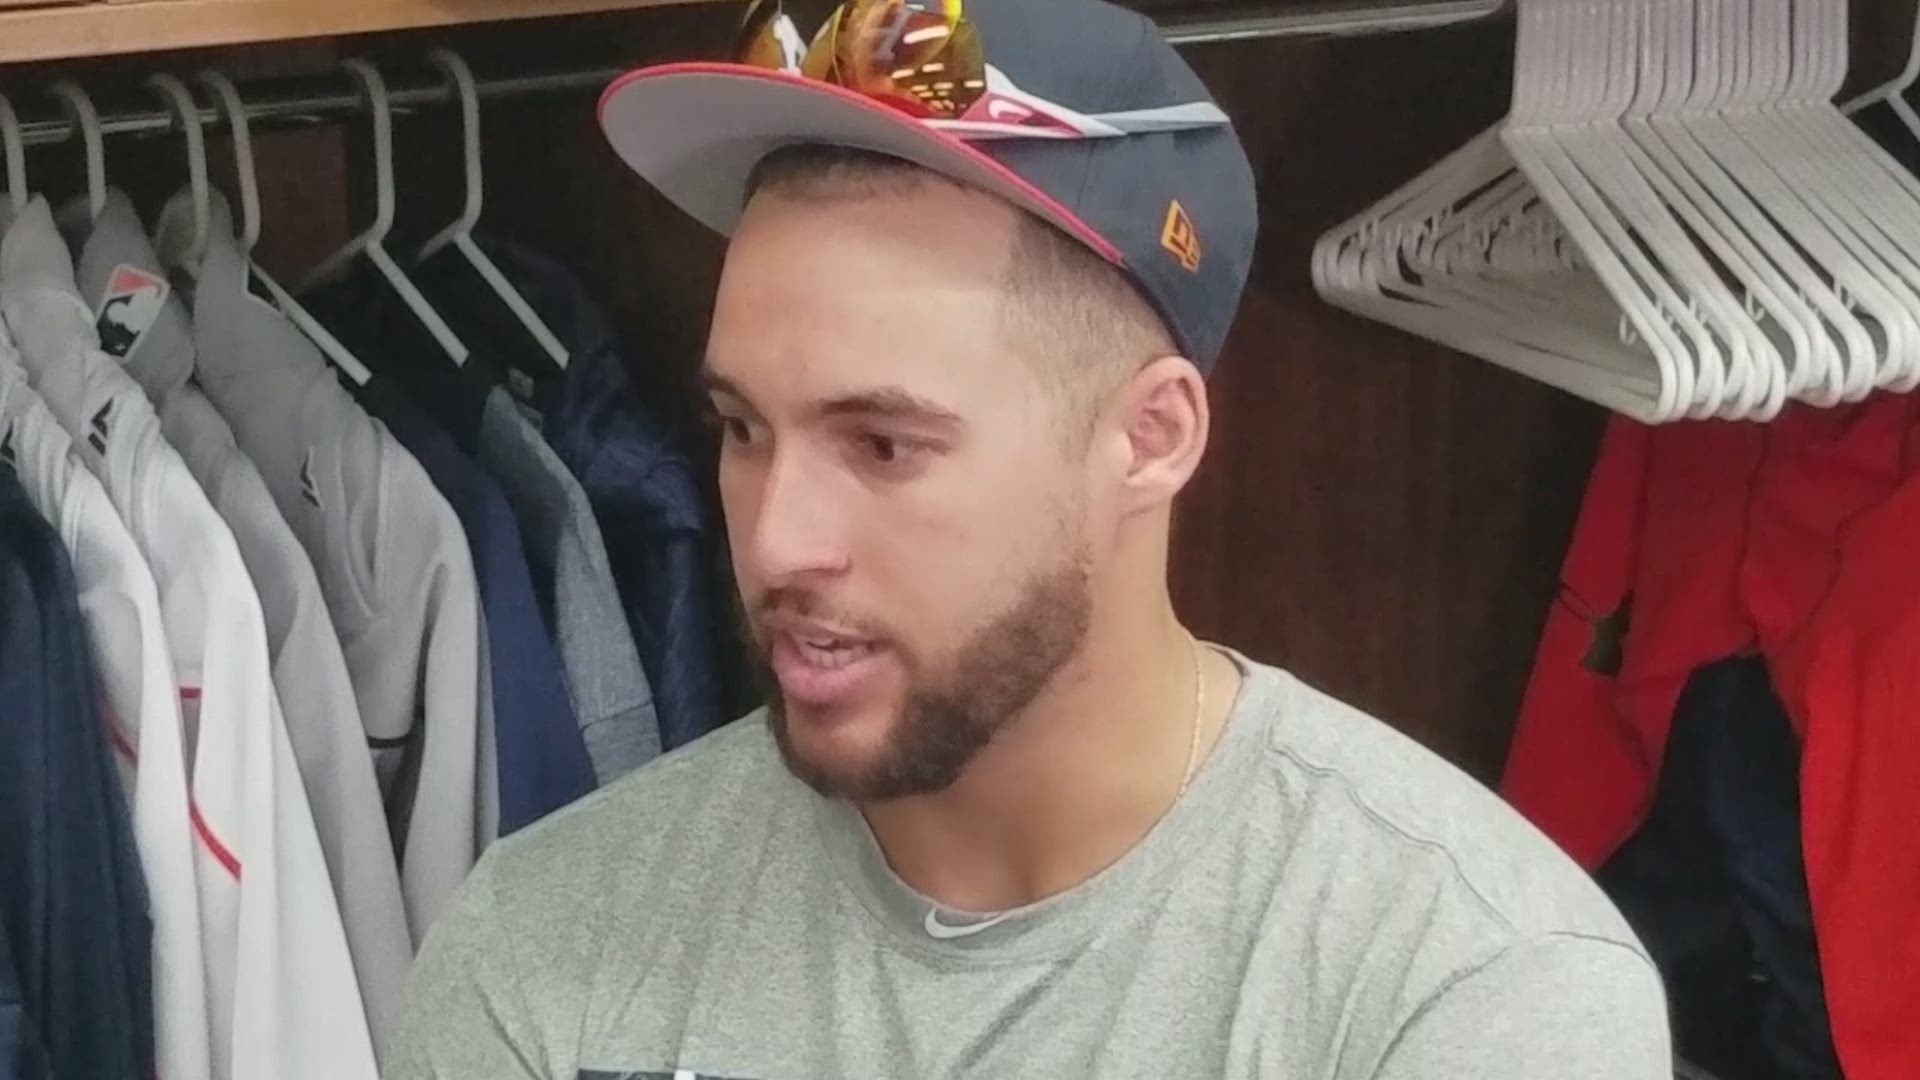 George Springer arrived early Friday to Astros Spring Training and spoke on the team moving forward.